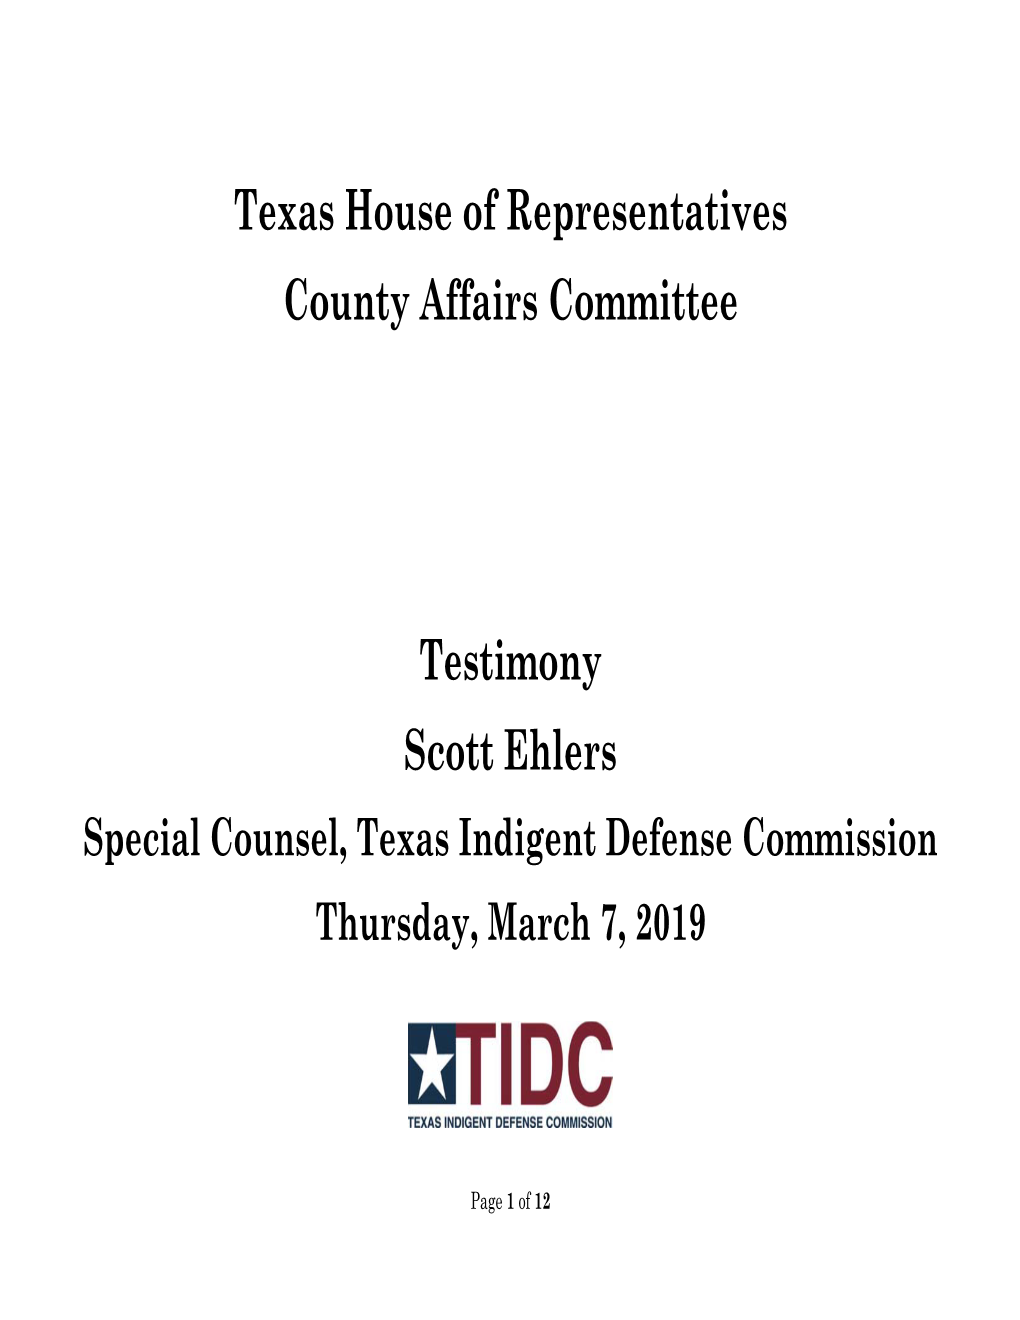 Texas House of Representatives County Affairs Committee